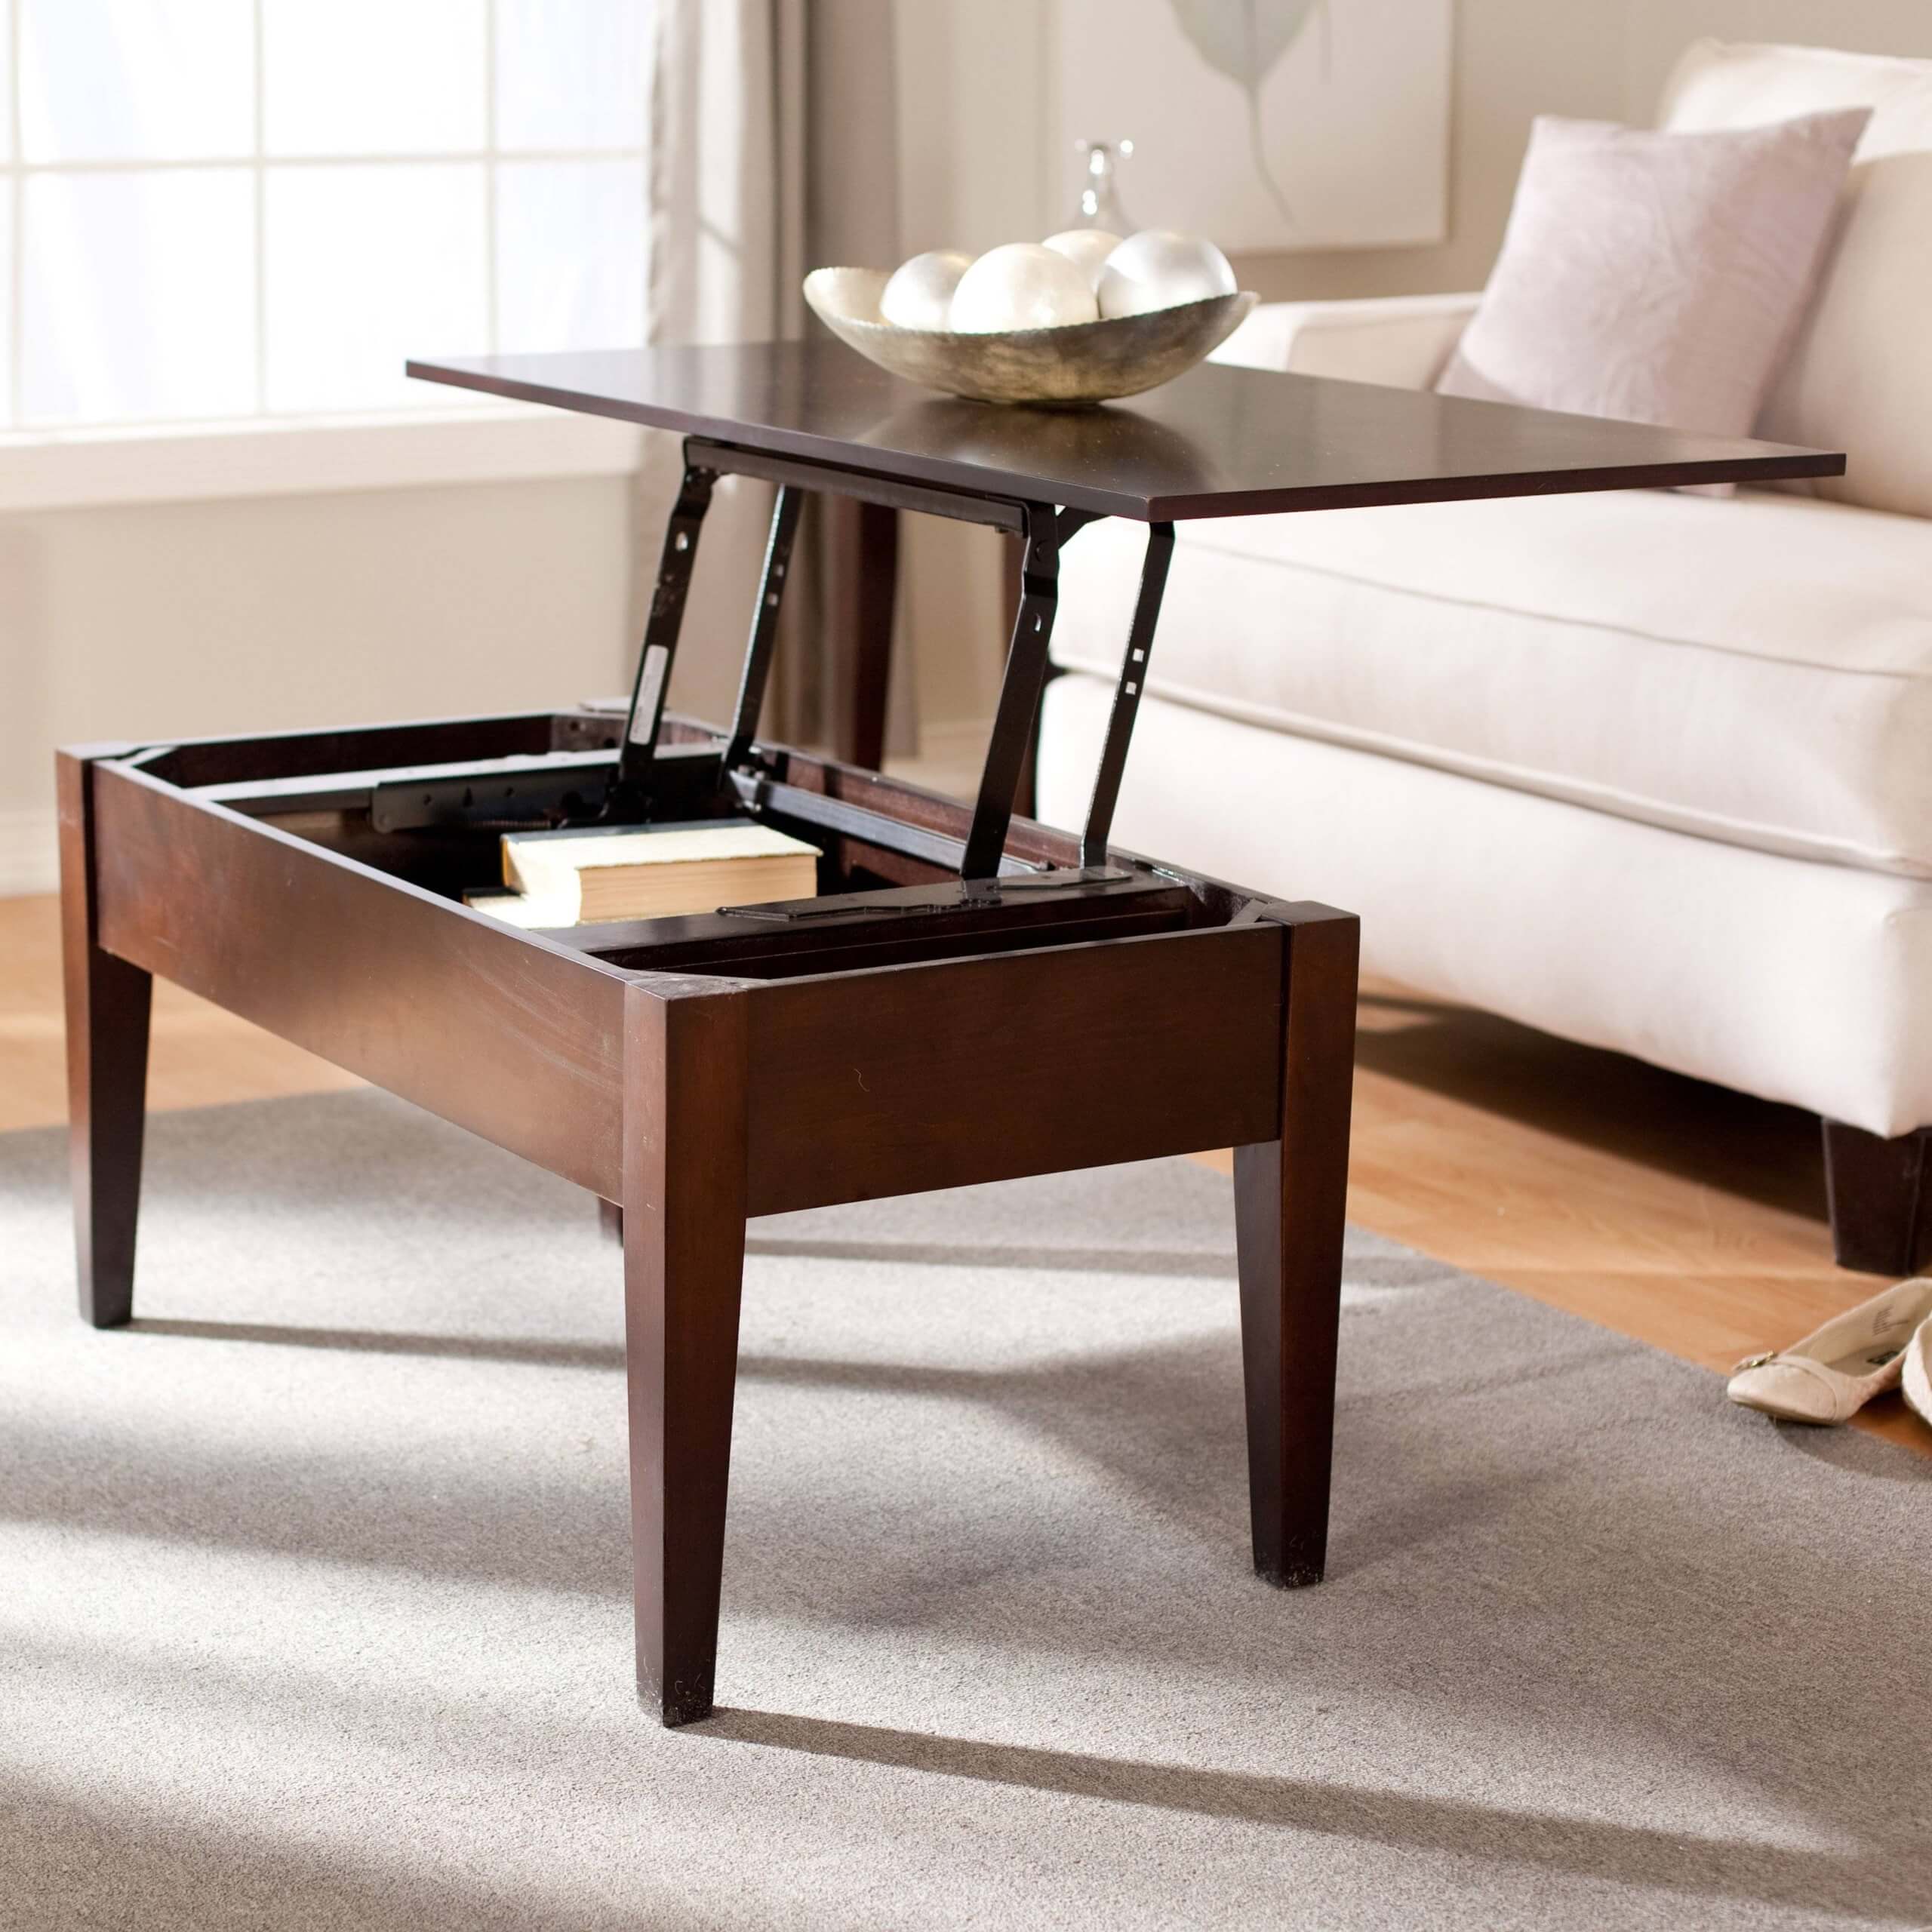 Coffee table that transforms